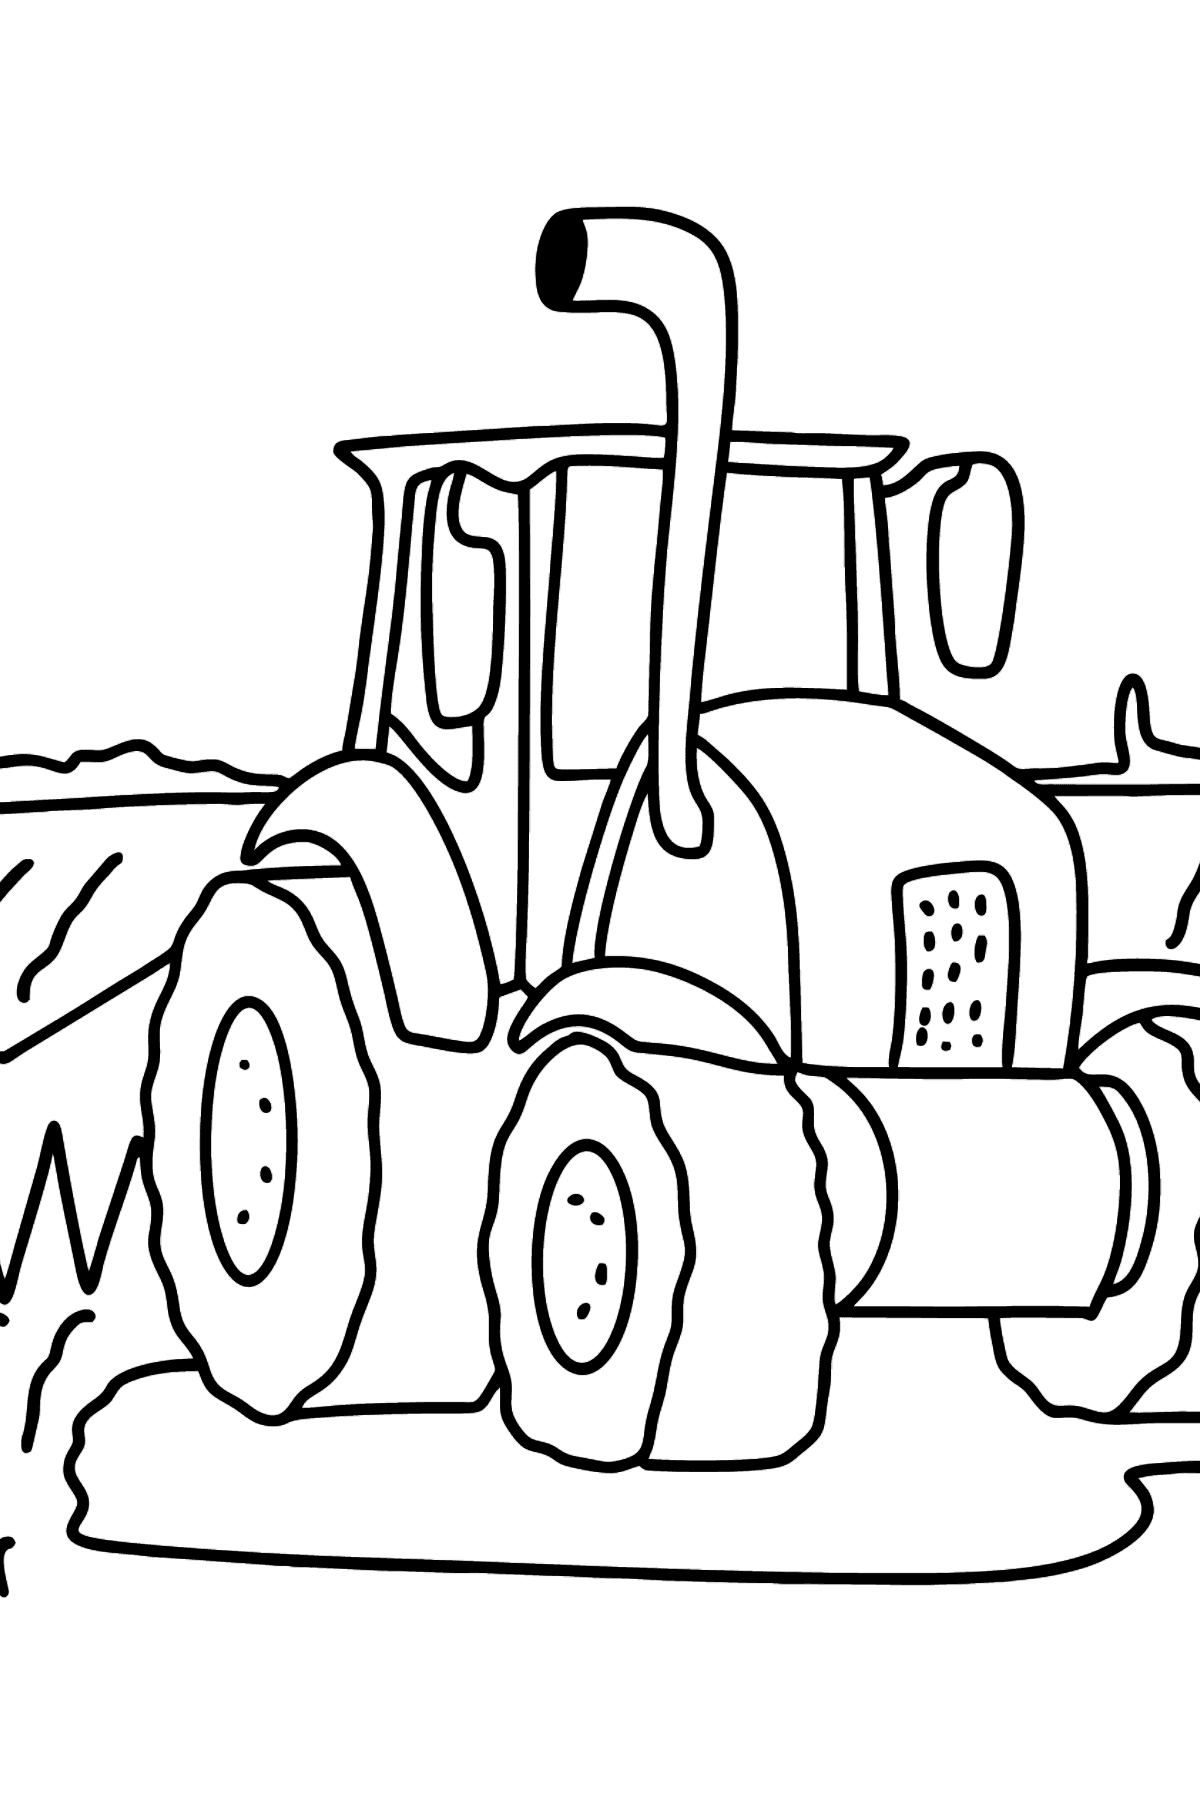 Tractor in the Field coloring page - Coloring Pages for Kids